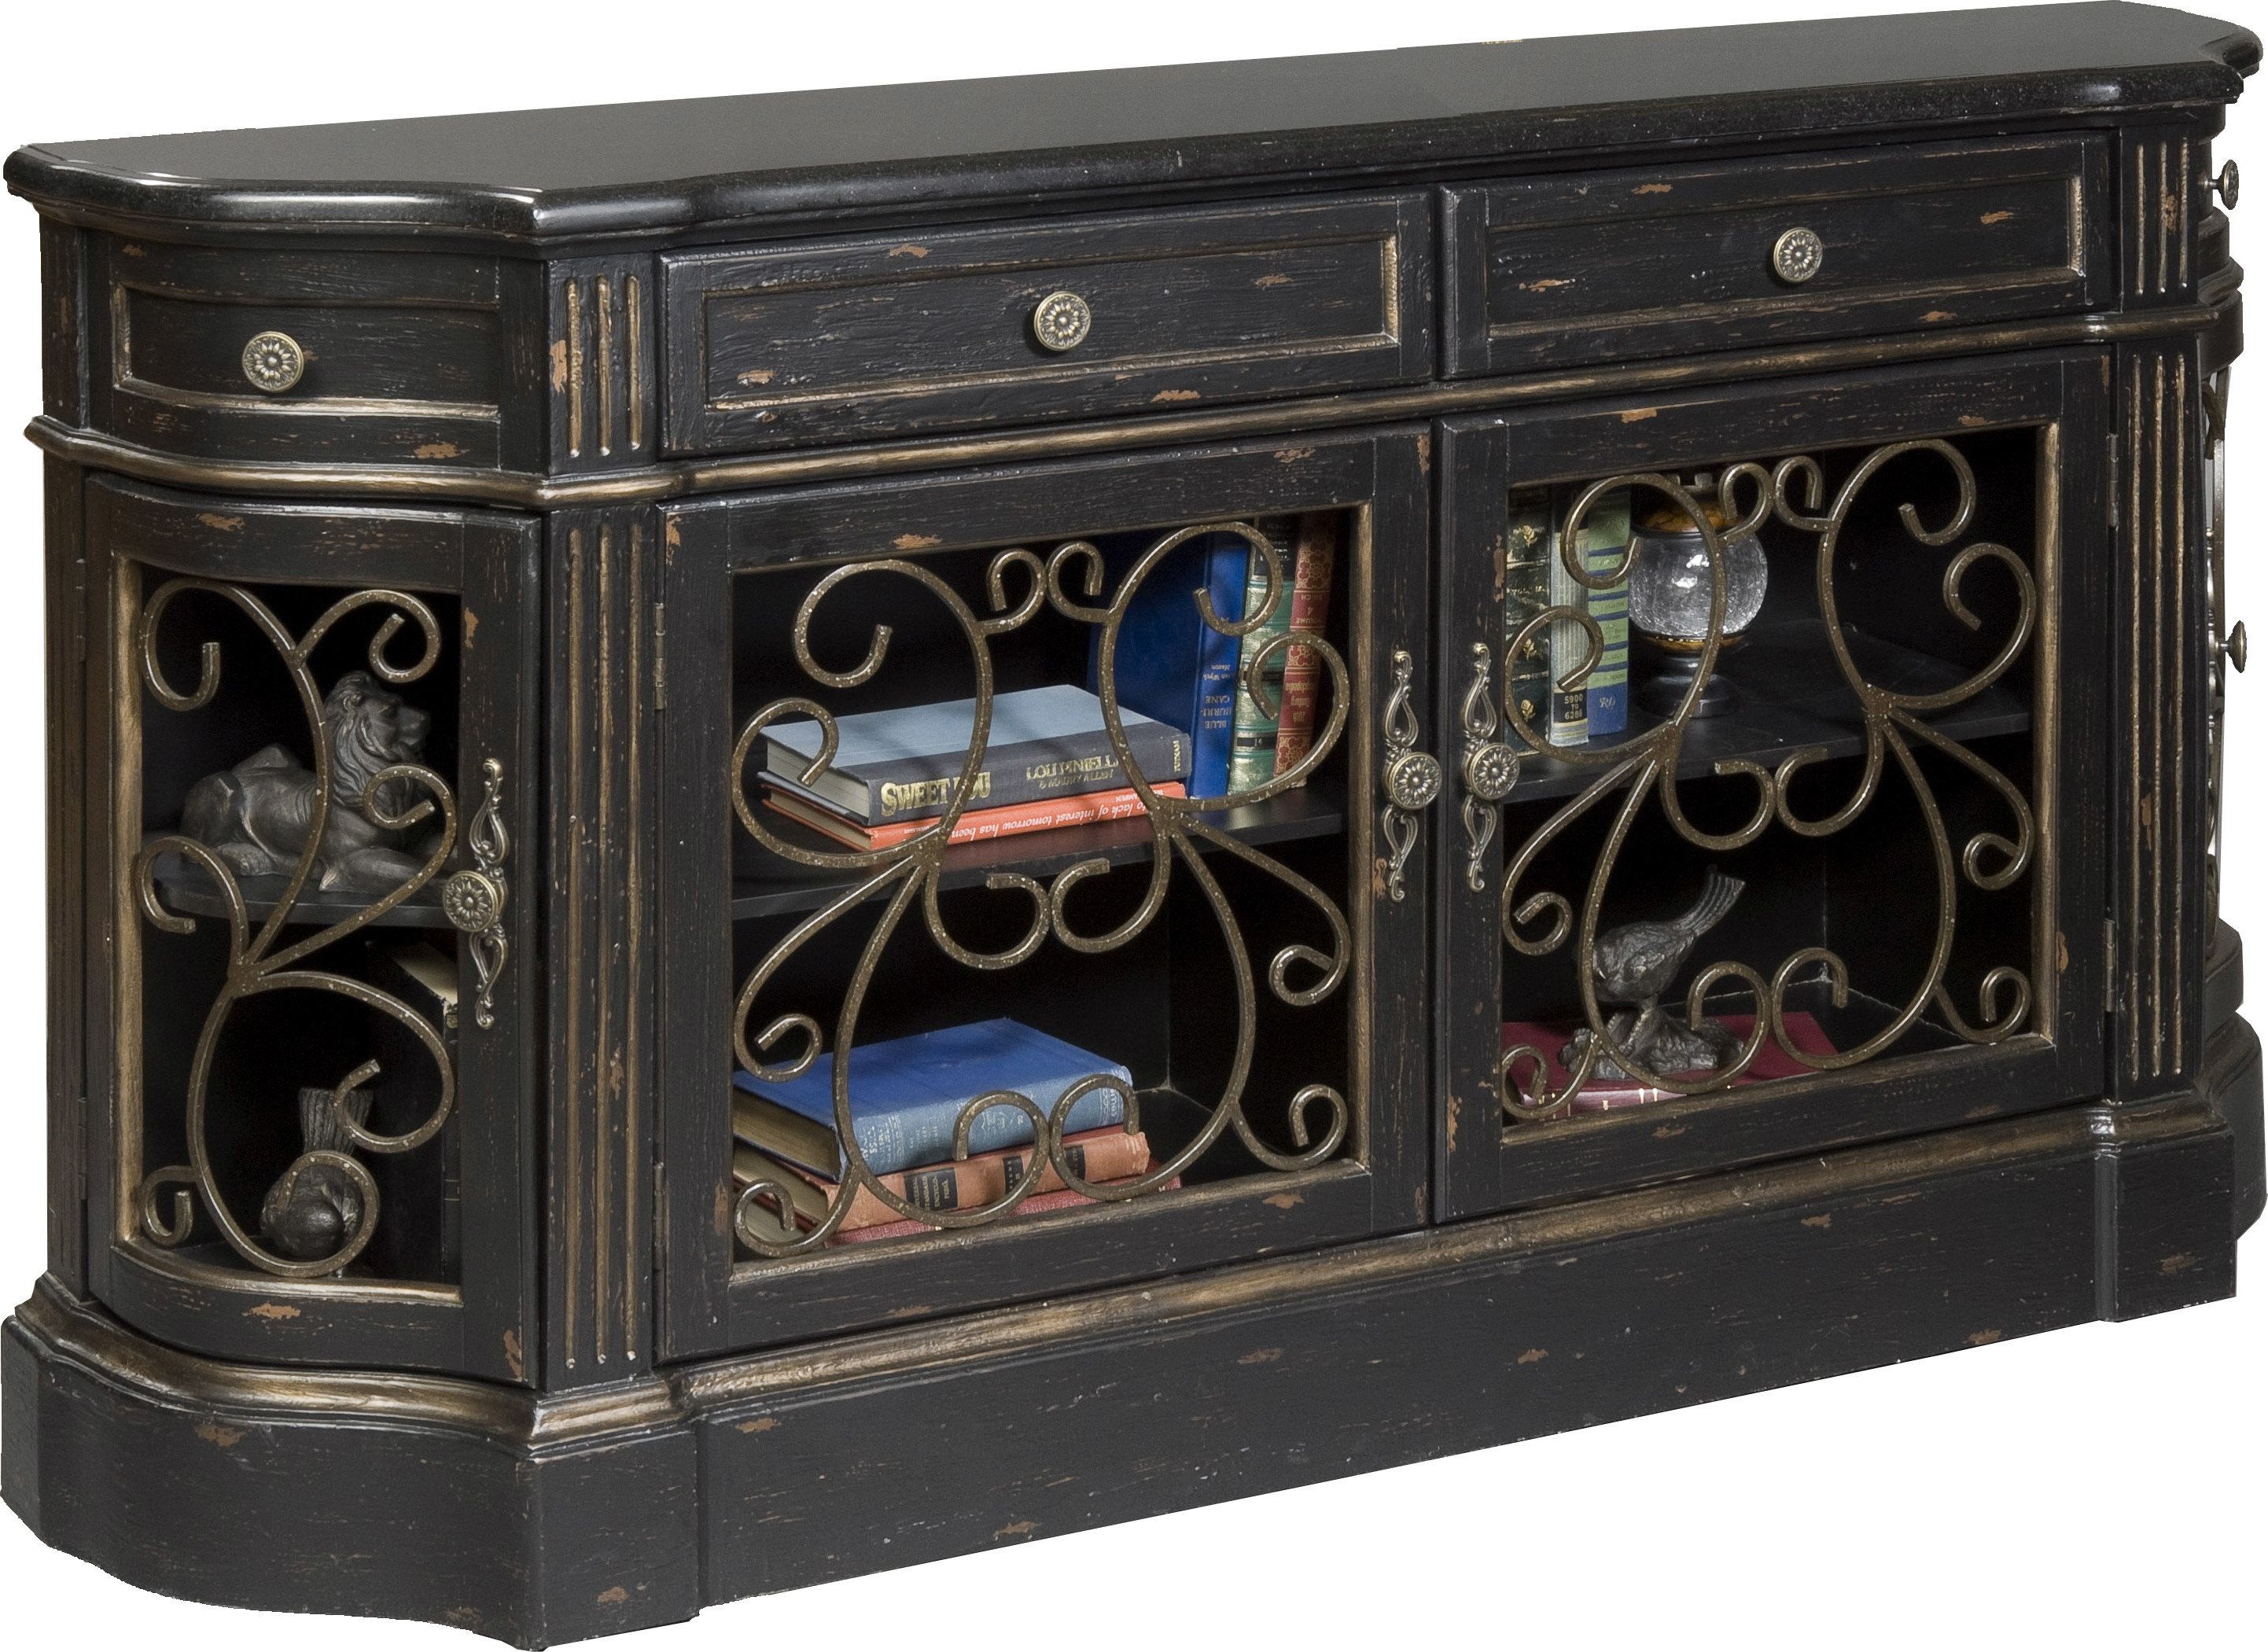 Salkeld Sideboard Pertaining To Best And Newest Chalus Sideboards (View 4 of 20)